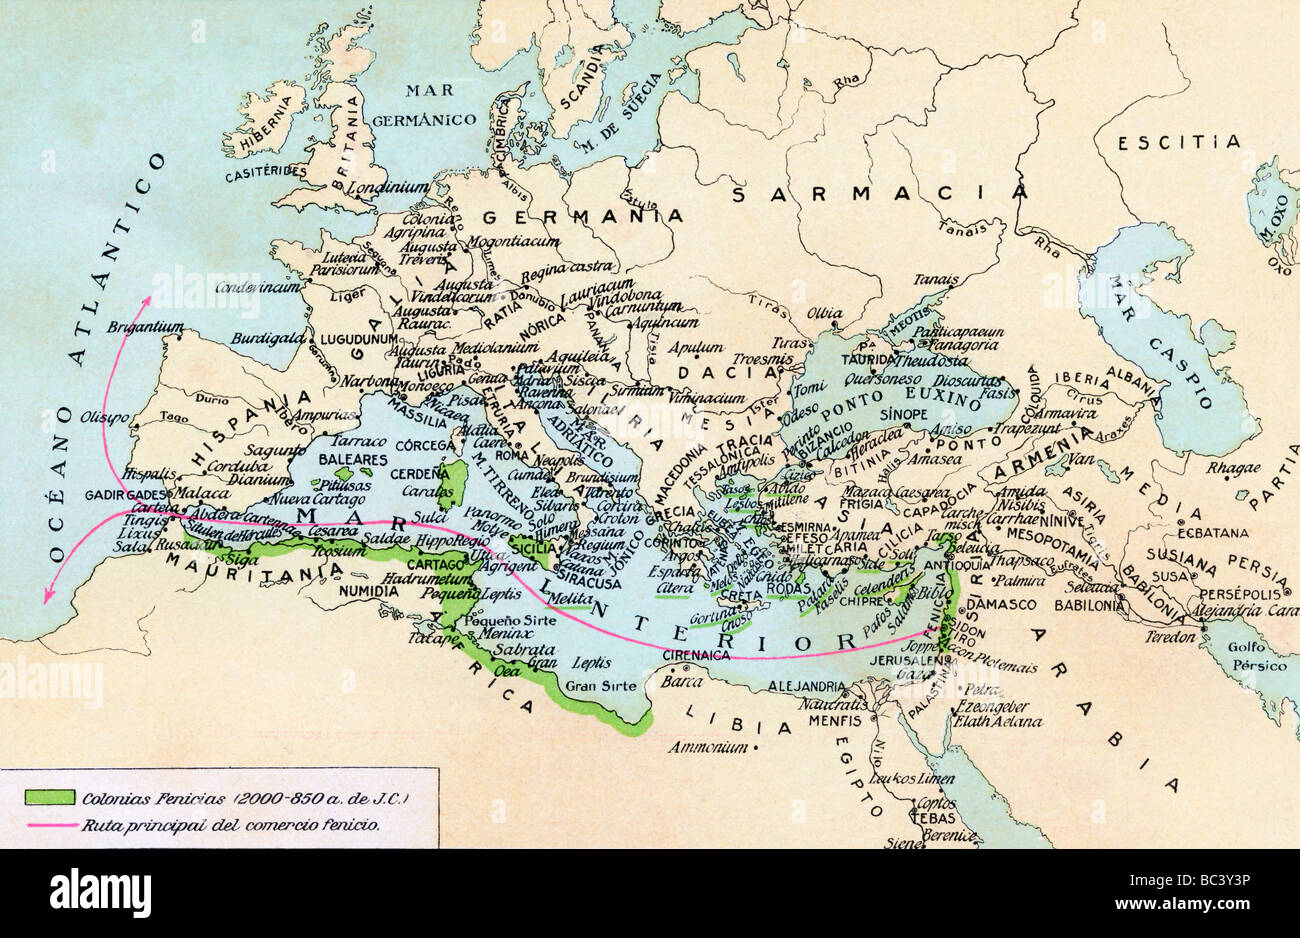 Phoenician colonies and area of influence in the Mediterranean, 200 to 850 B C.  See key in Description below. Stock Photo